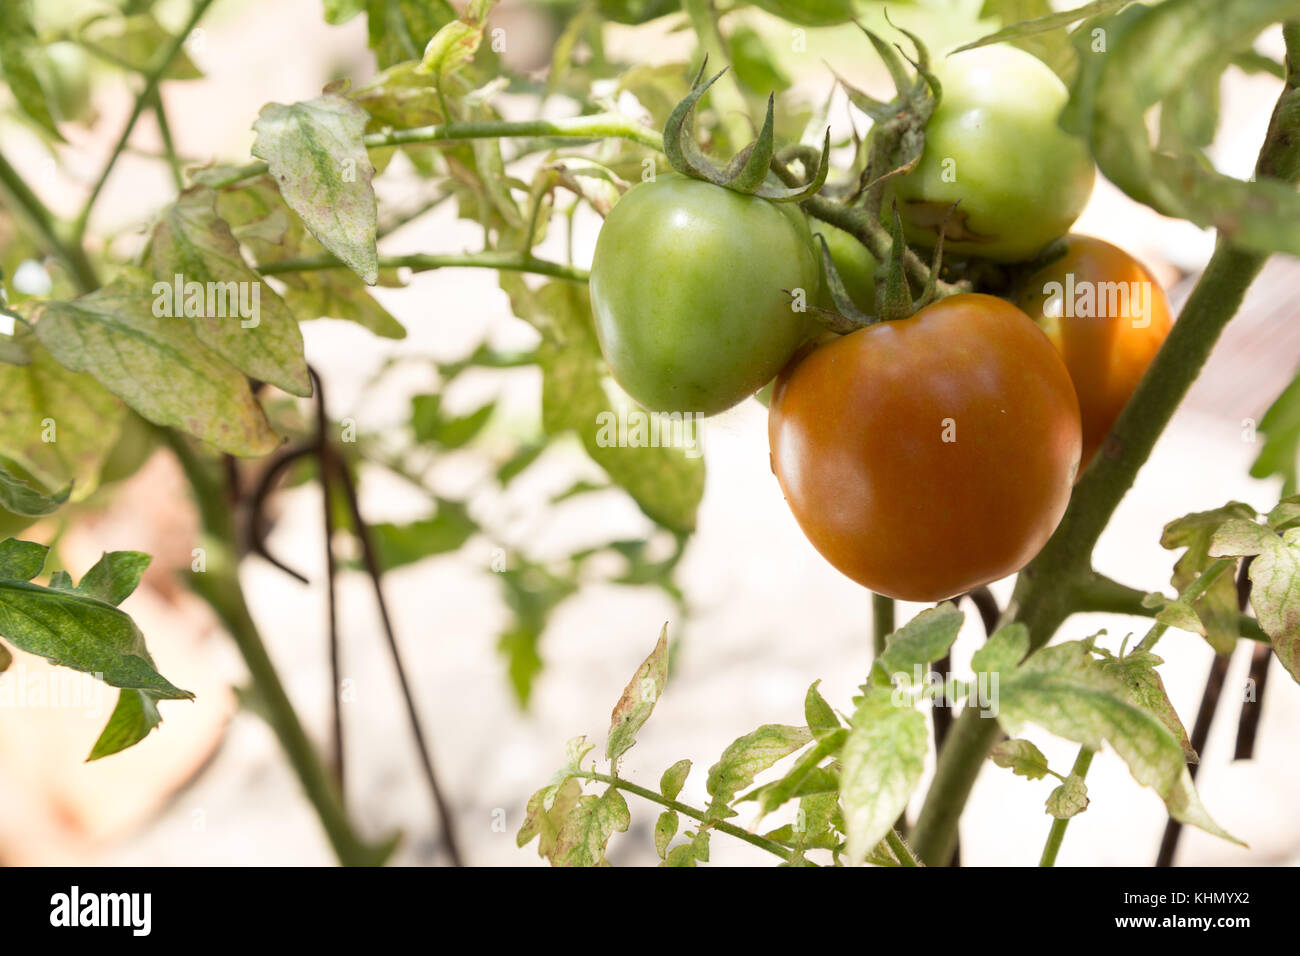 Asuncion, Paraguay. 18th Nov, 2017. On a sunny and windy day in Asuncion with temperatures high around 30°C, red and green organic tomatoes on the vine are still growing and ripening throughout the spring sunshine in a backyard garden. Credit: Andre M. Chang/ARDUOPRESS/Alamy Live News Stock Photo